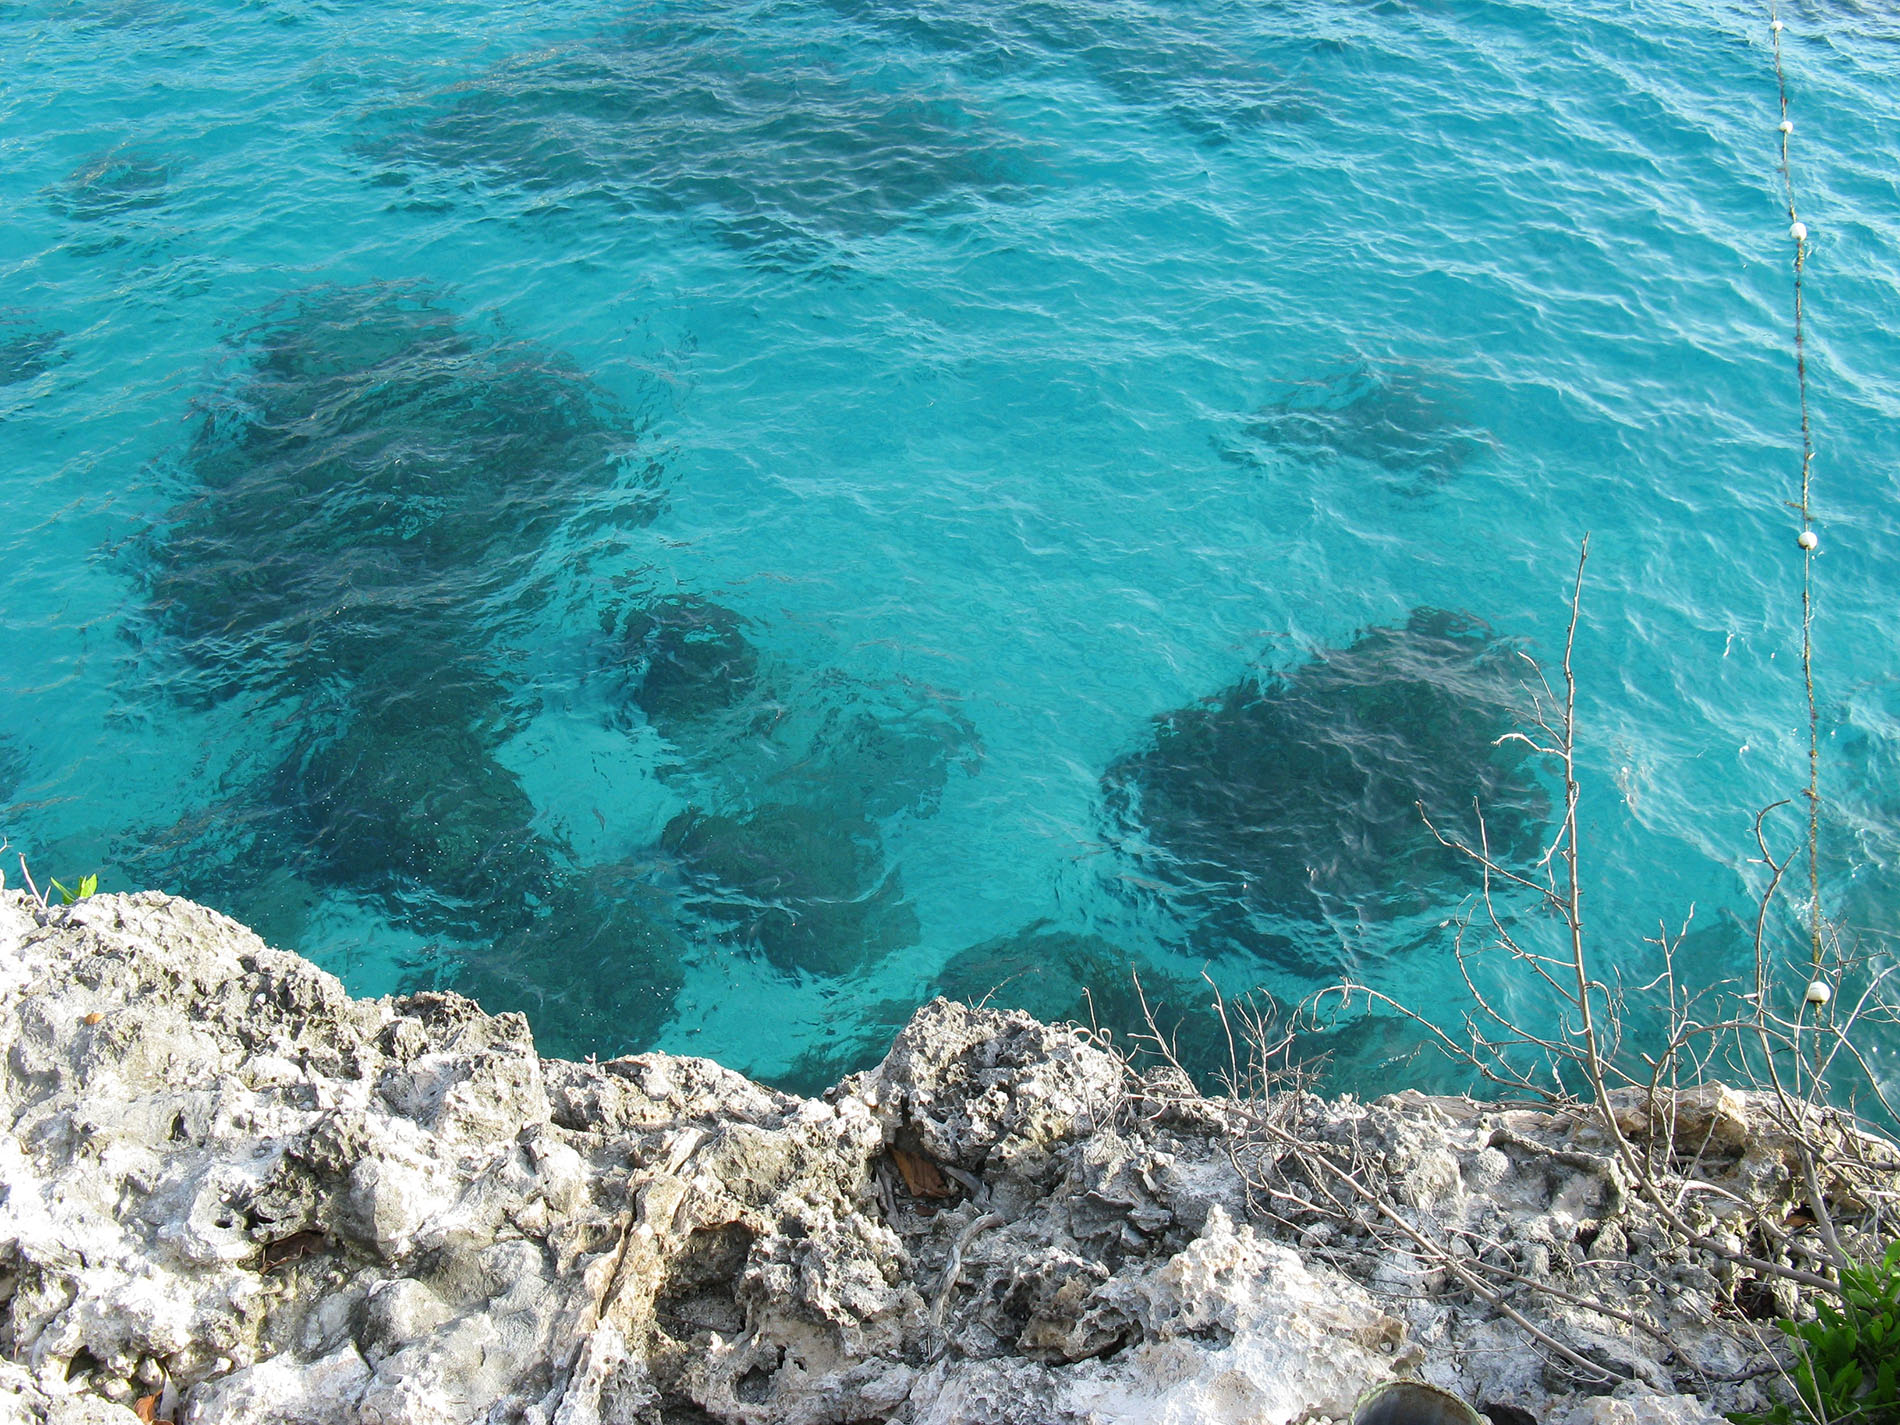 A rocky area next to clear, turquoise water in Jamaica.